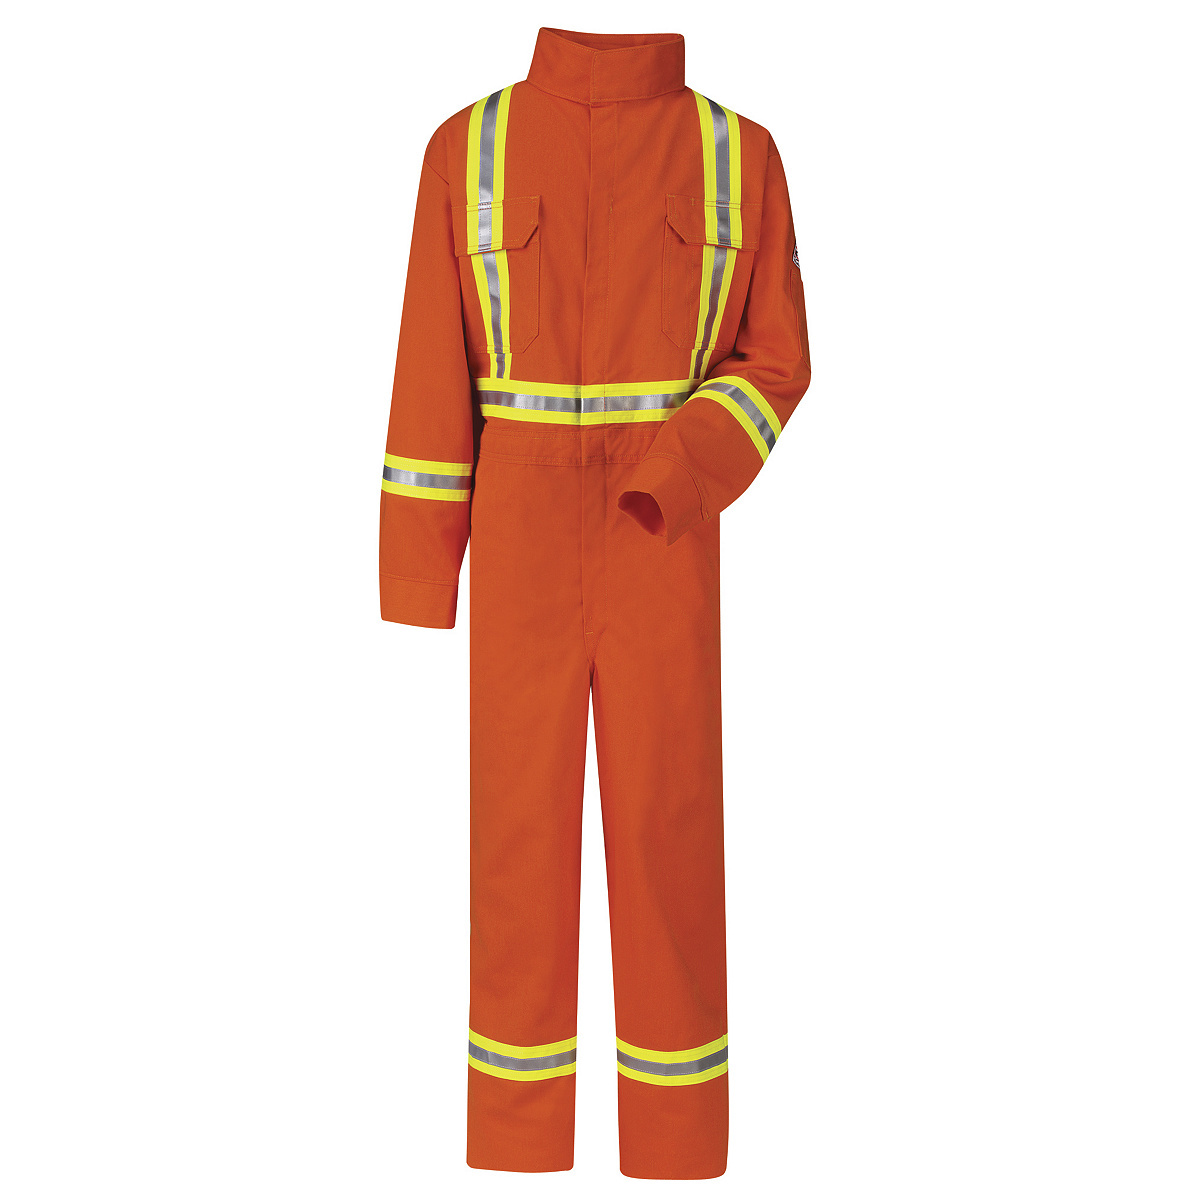 Bulwark® 38 Regular Orange Westex Ultrasoft® Twill/Cotton/Nylon Flame Resistant Coveralls With Zipper Front Closure And Reflecti